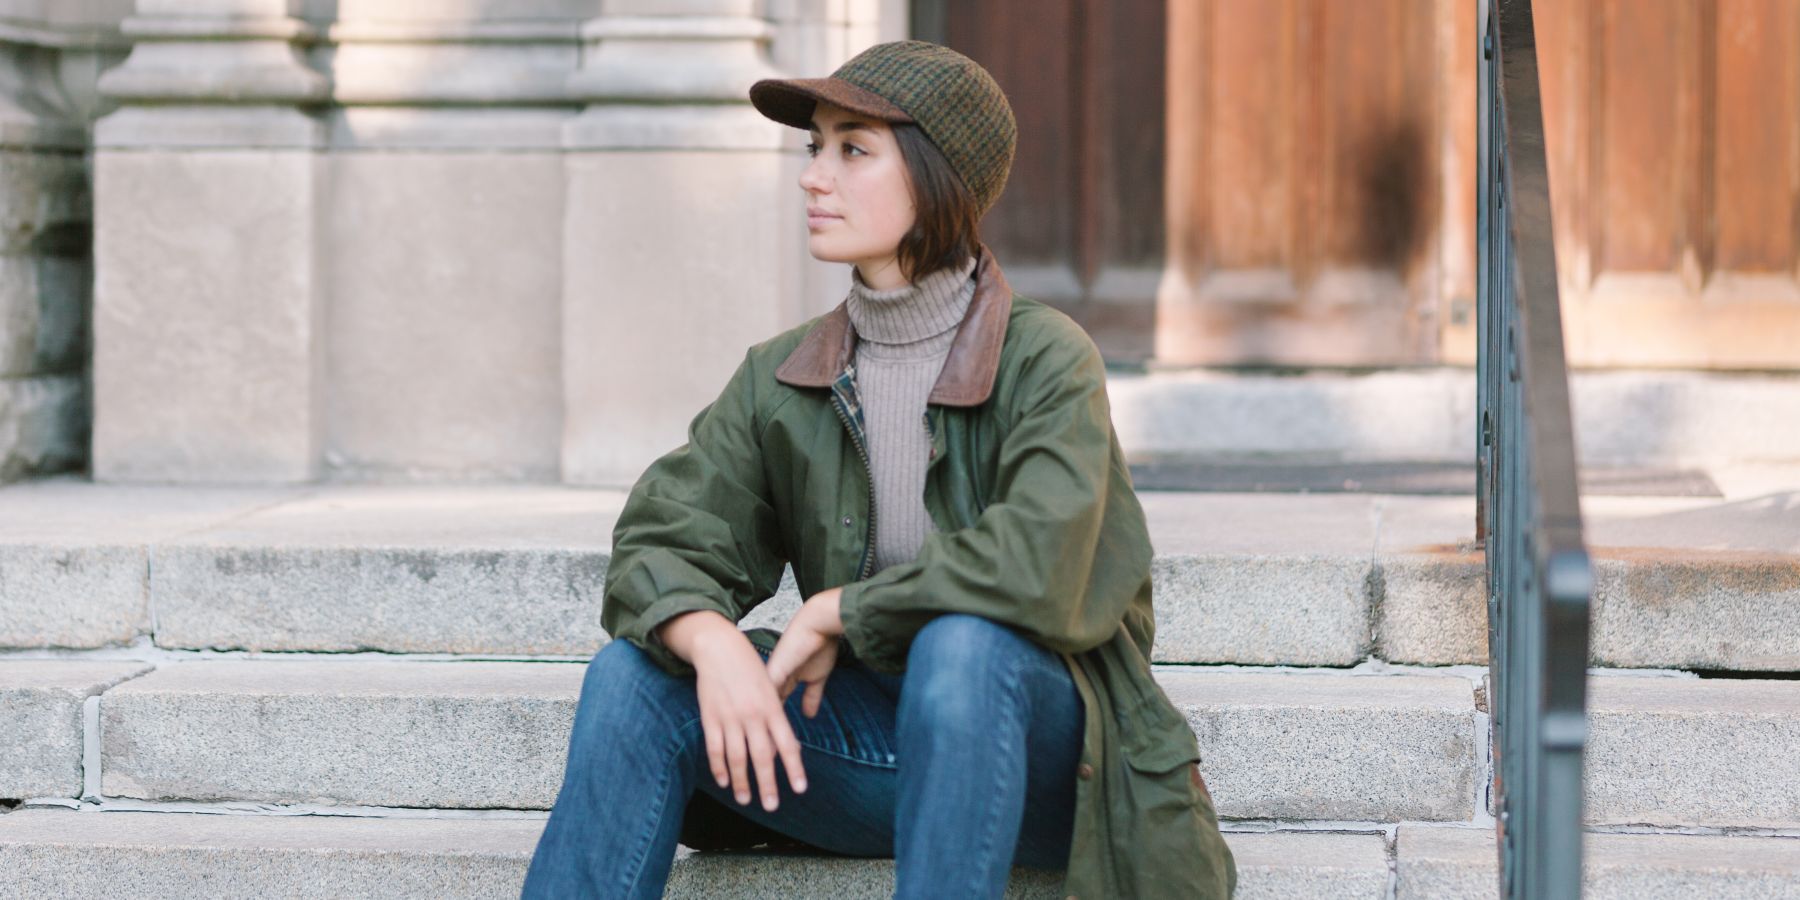 Puffin Gear Hats for Fall and Winter Carefully Made in Canada. Choose from Harris Tweed, Boiled Wool, Oilskin, Hemp Hats, Linen Scarves or Polartec Fleece Scarves and Hats-Designed to keep your stylish, warm and dry.